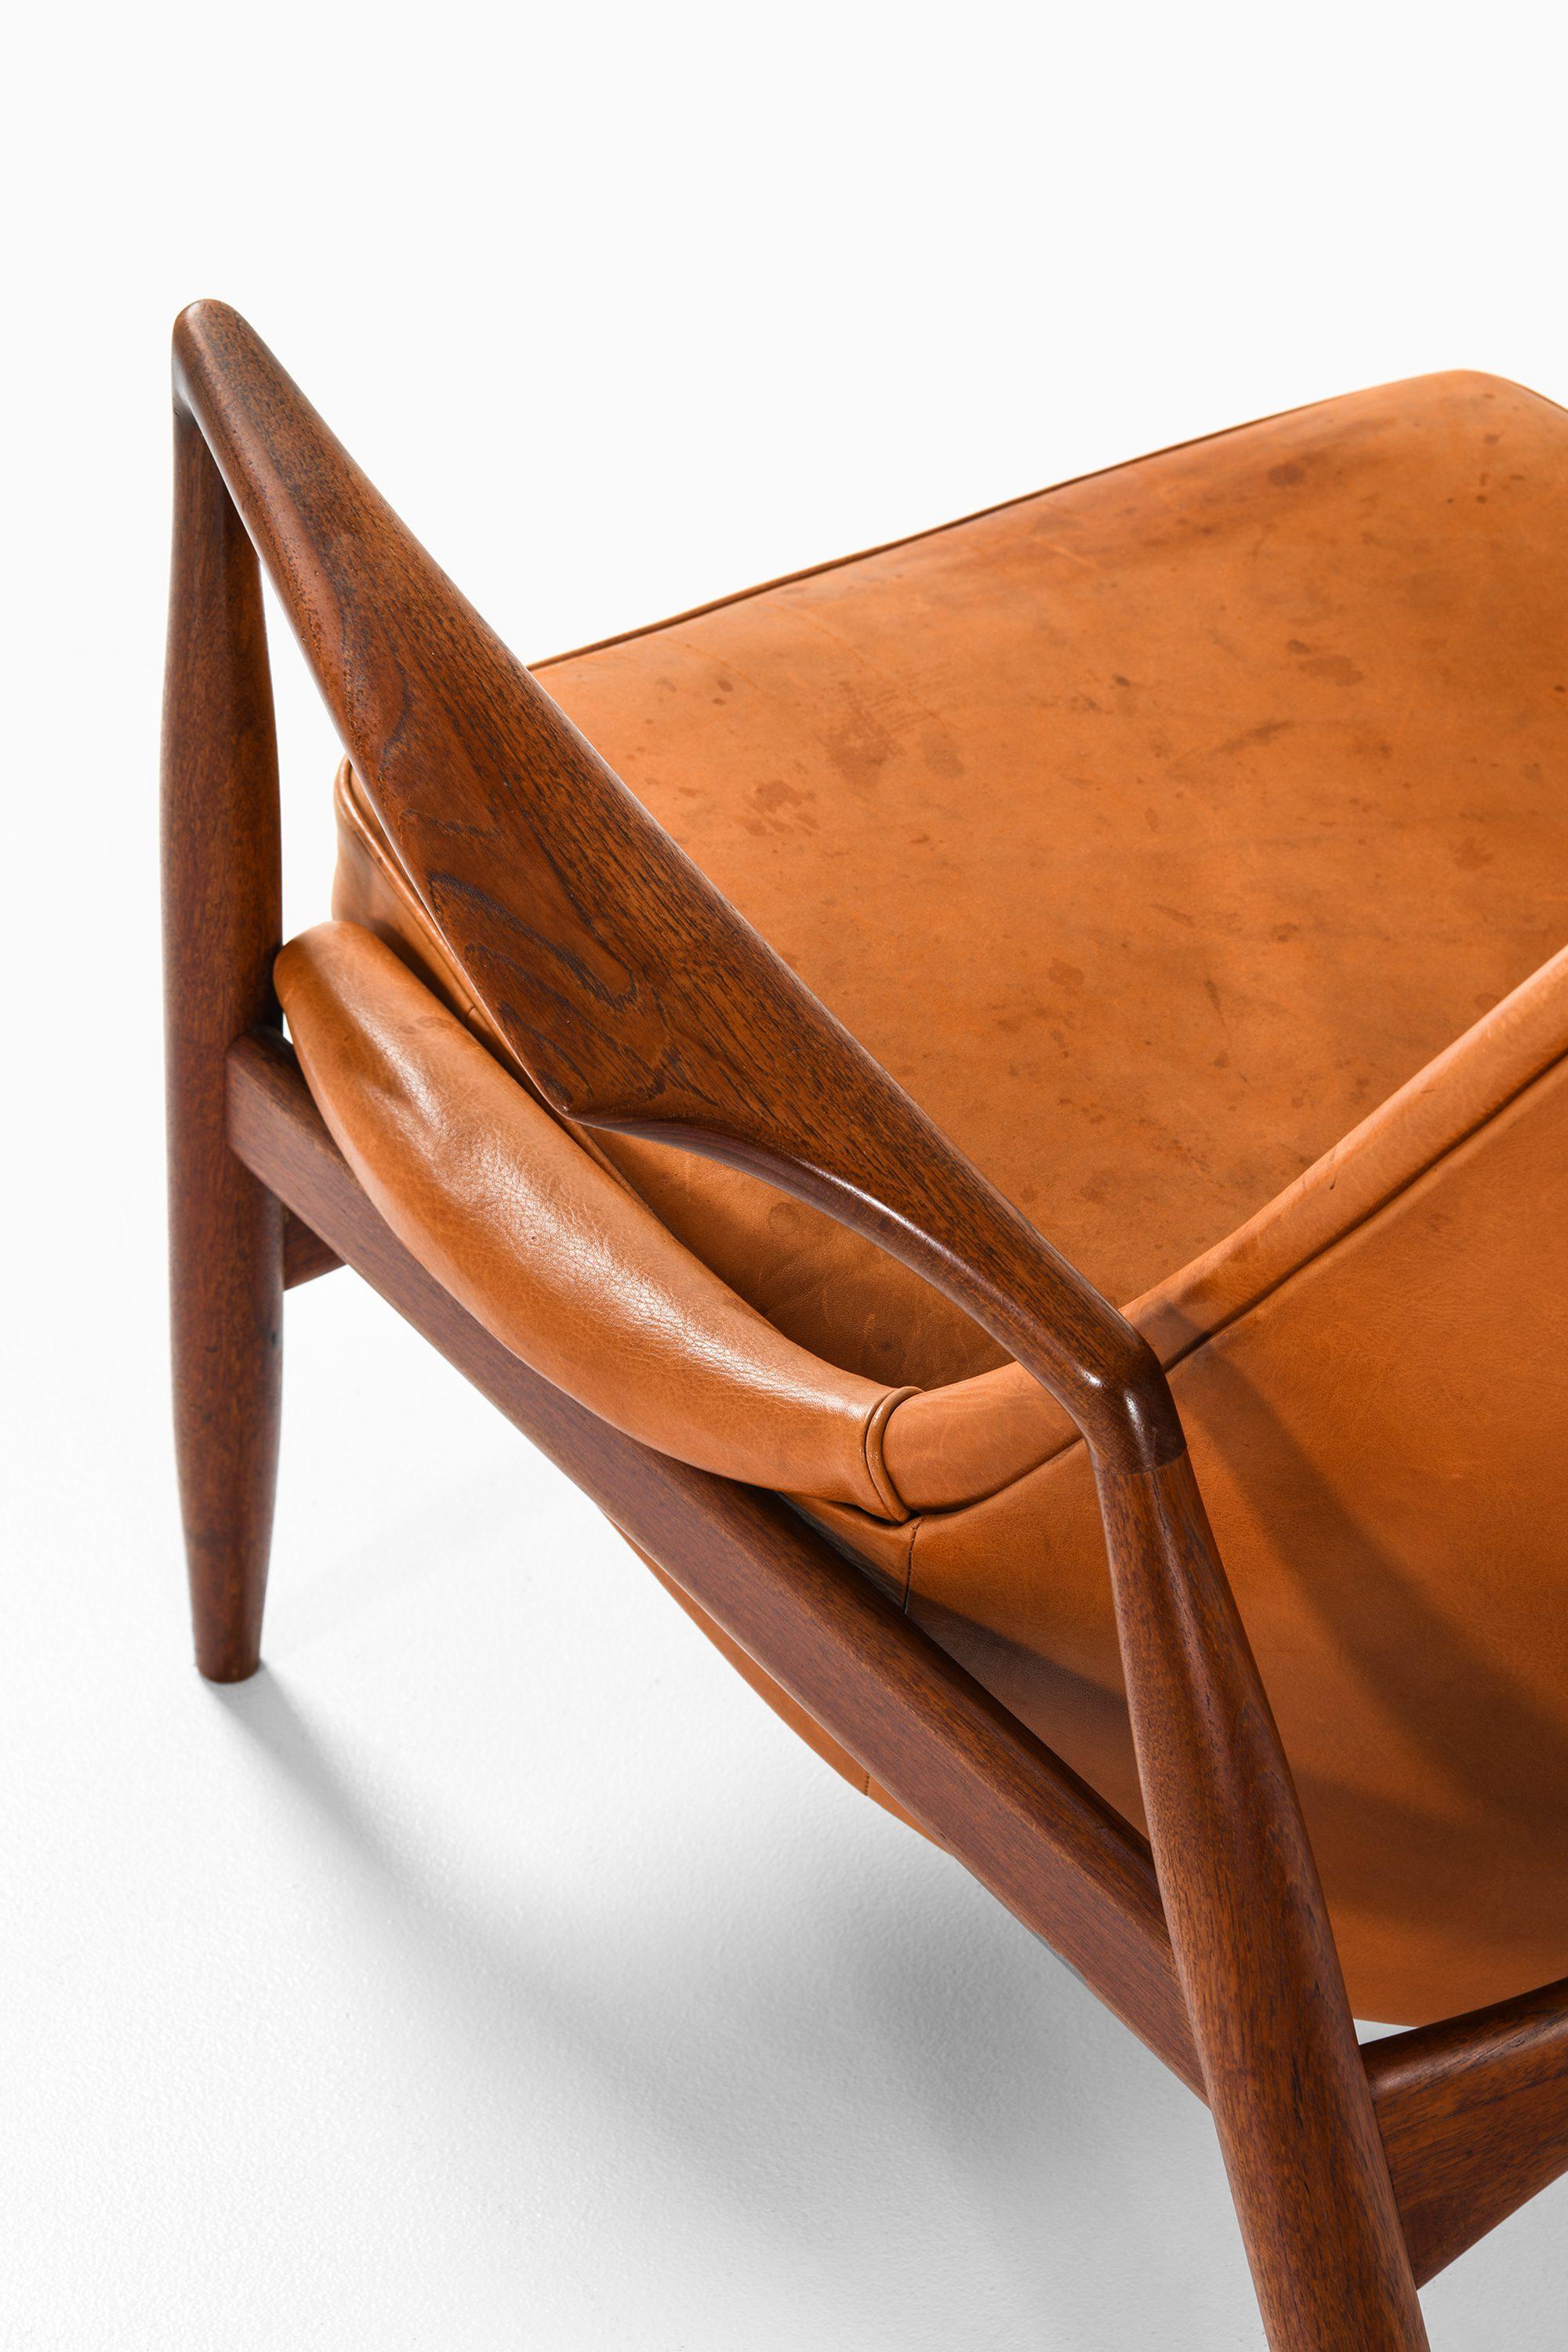 Pair of Easy Chairs in Teak and Leather by Ib Kofod-Larsen, 1950s For Sale 3